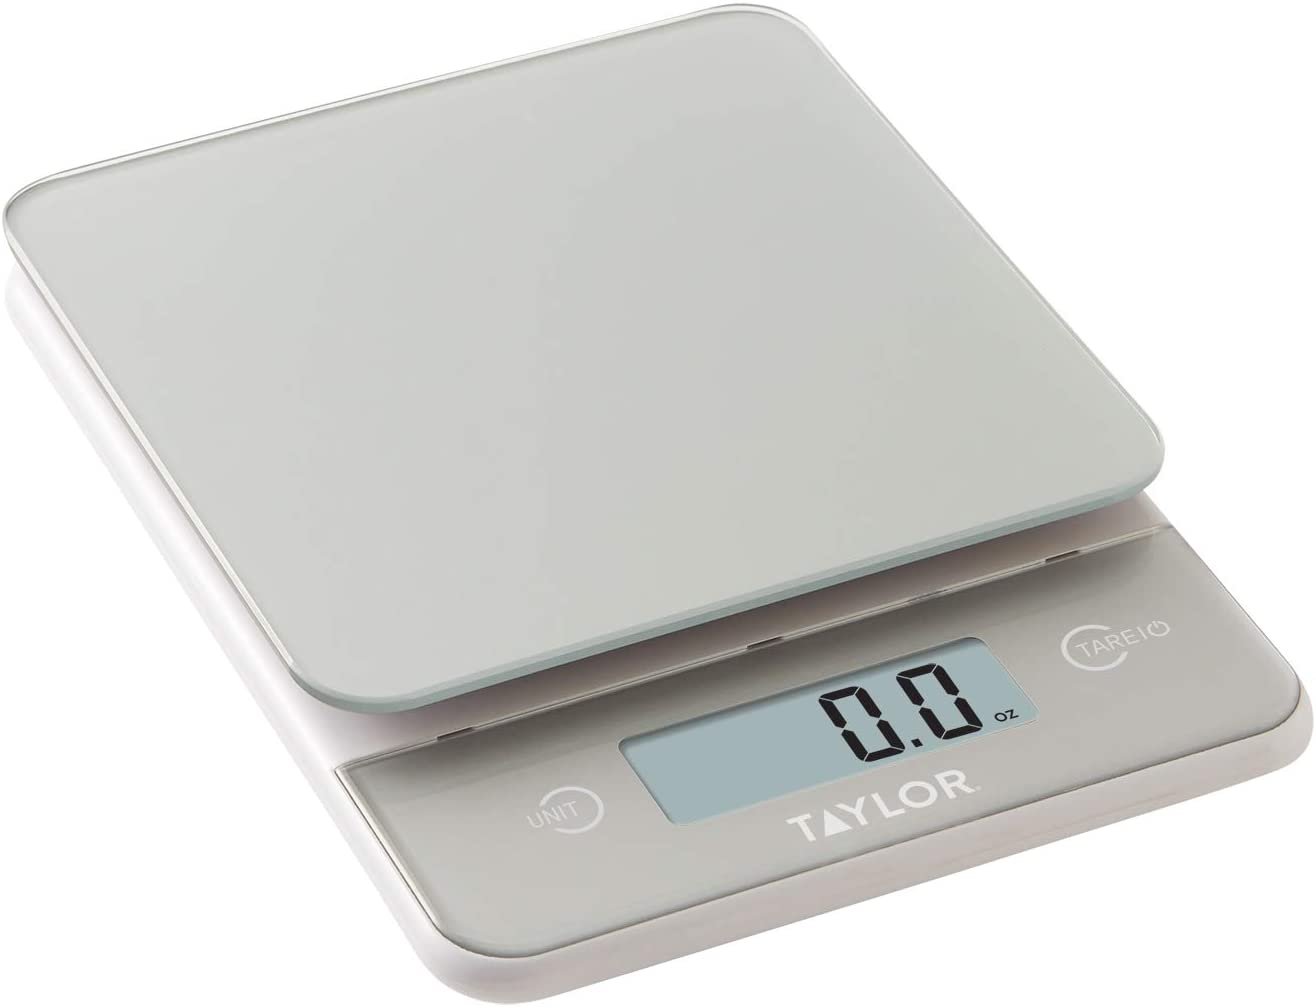 Taylor Precision Products 11lb Digital Glass Top Household Kitchen Scale